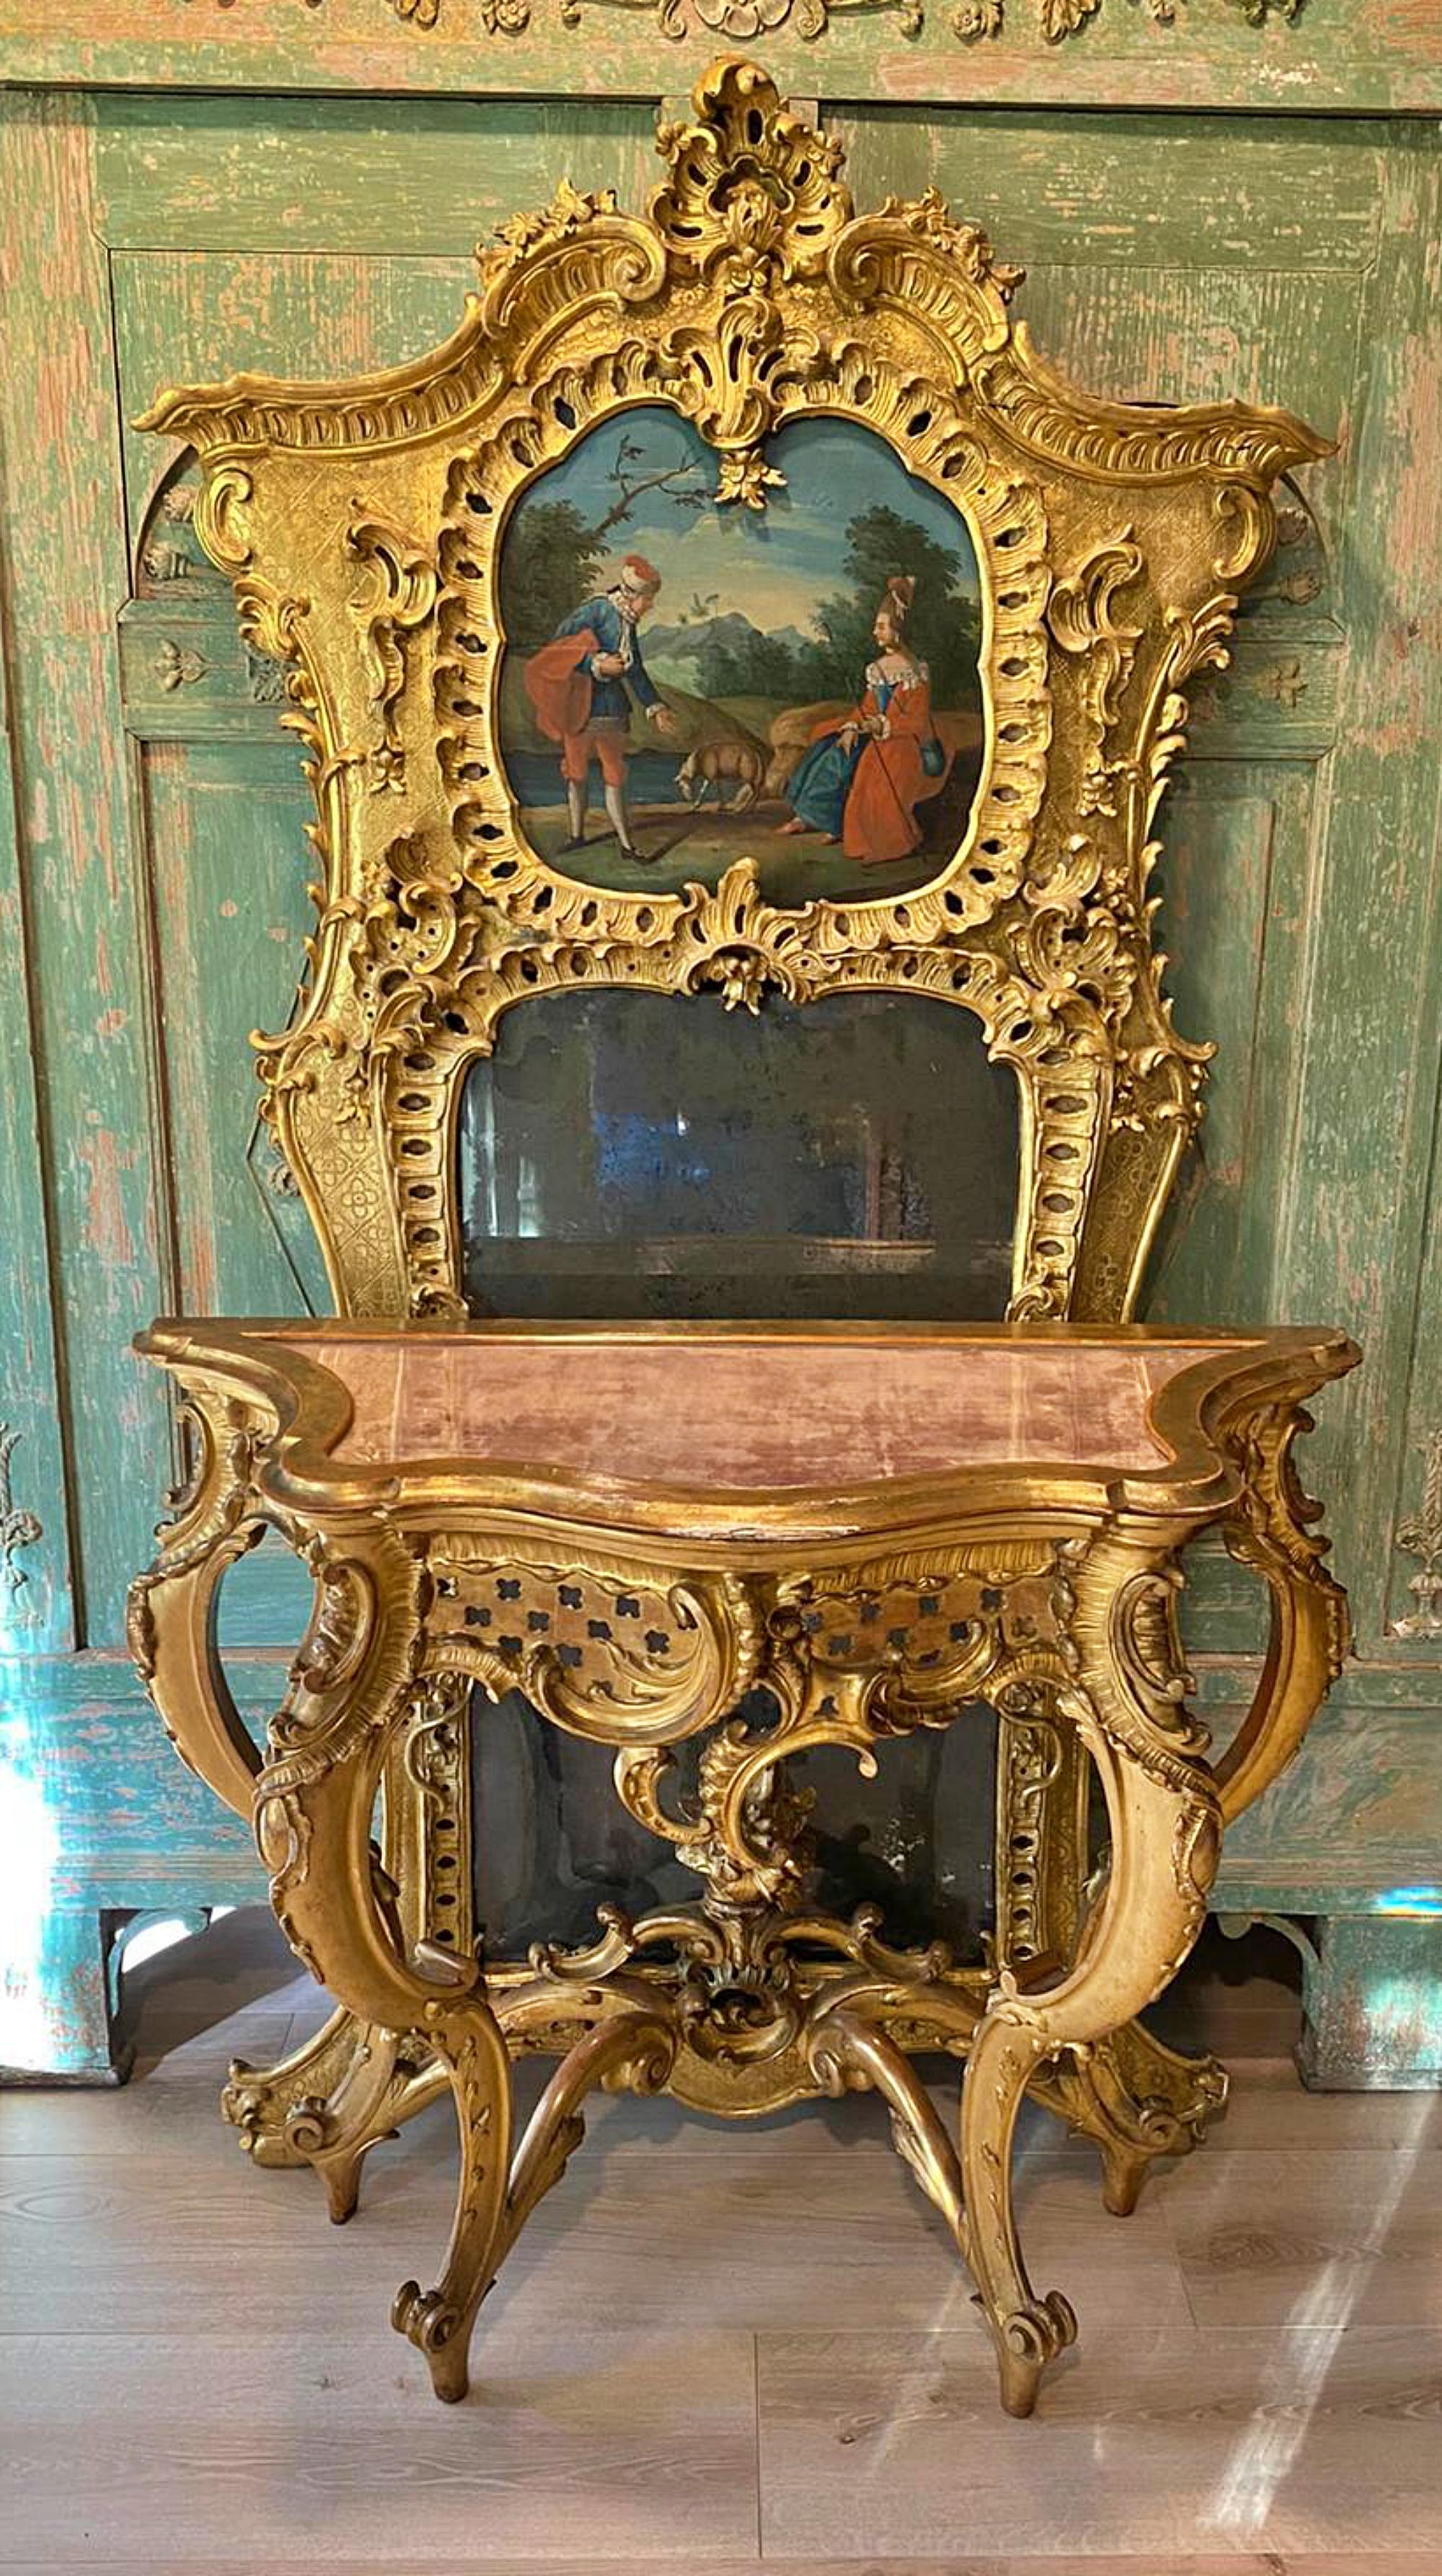 Important French mirror and console from 1760/70 18th century
carved from solid wood with old gold plating. 
In the upper part hand-painted oil painting with an epoch-typical scenery, impressive crowning, floral motifs, volutes and leaf tendrils